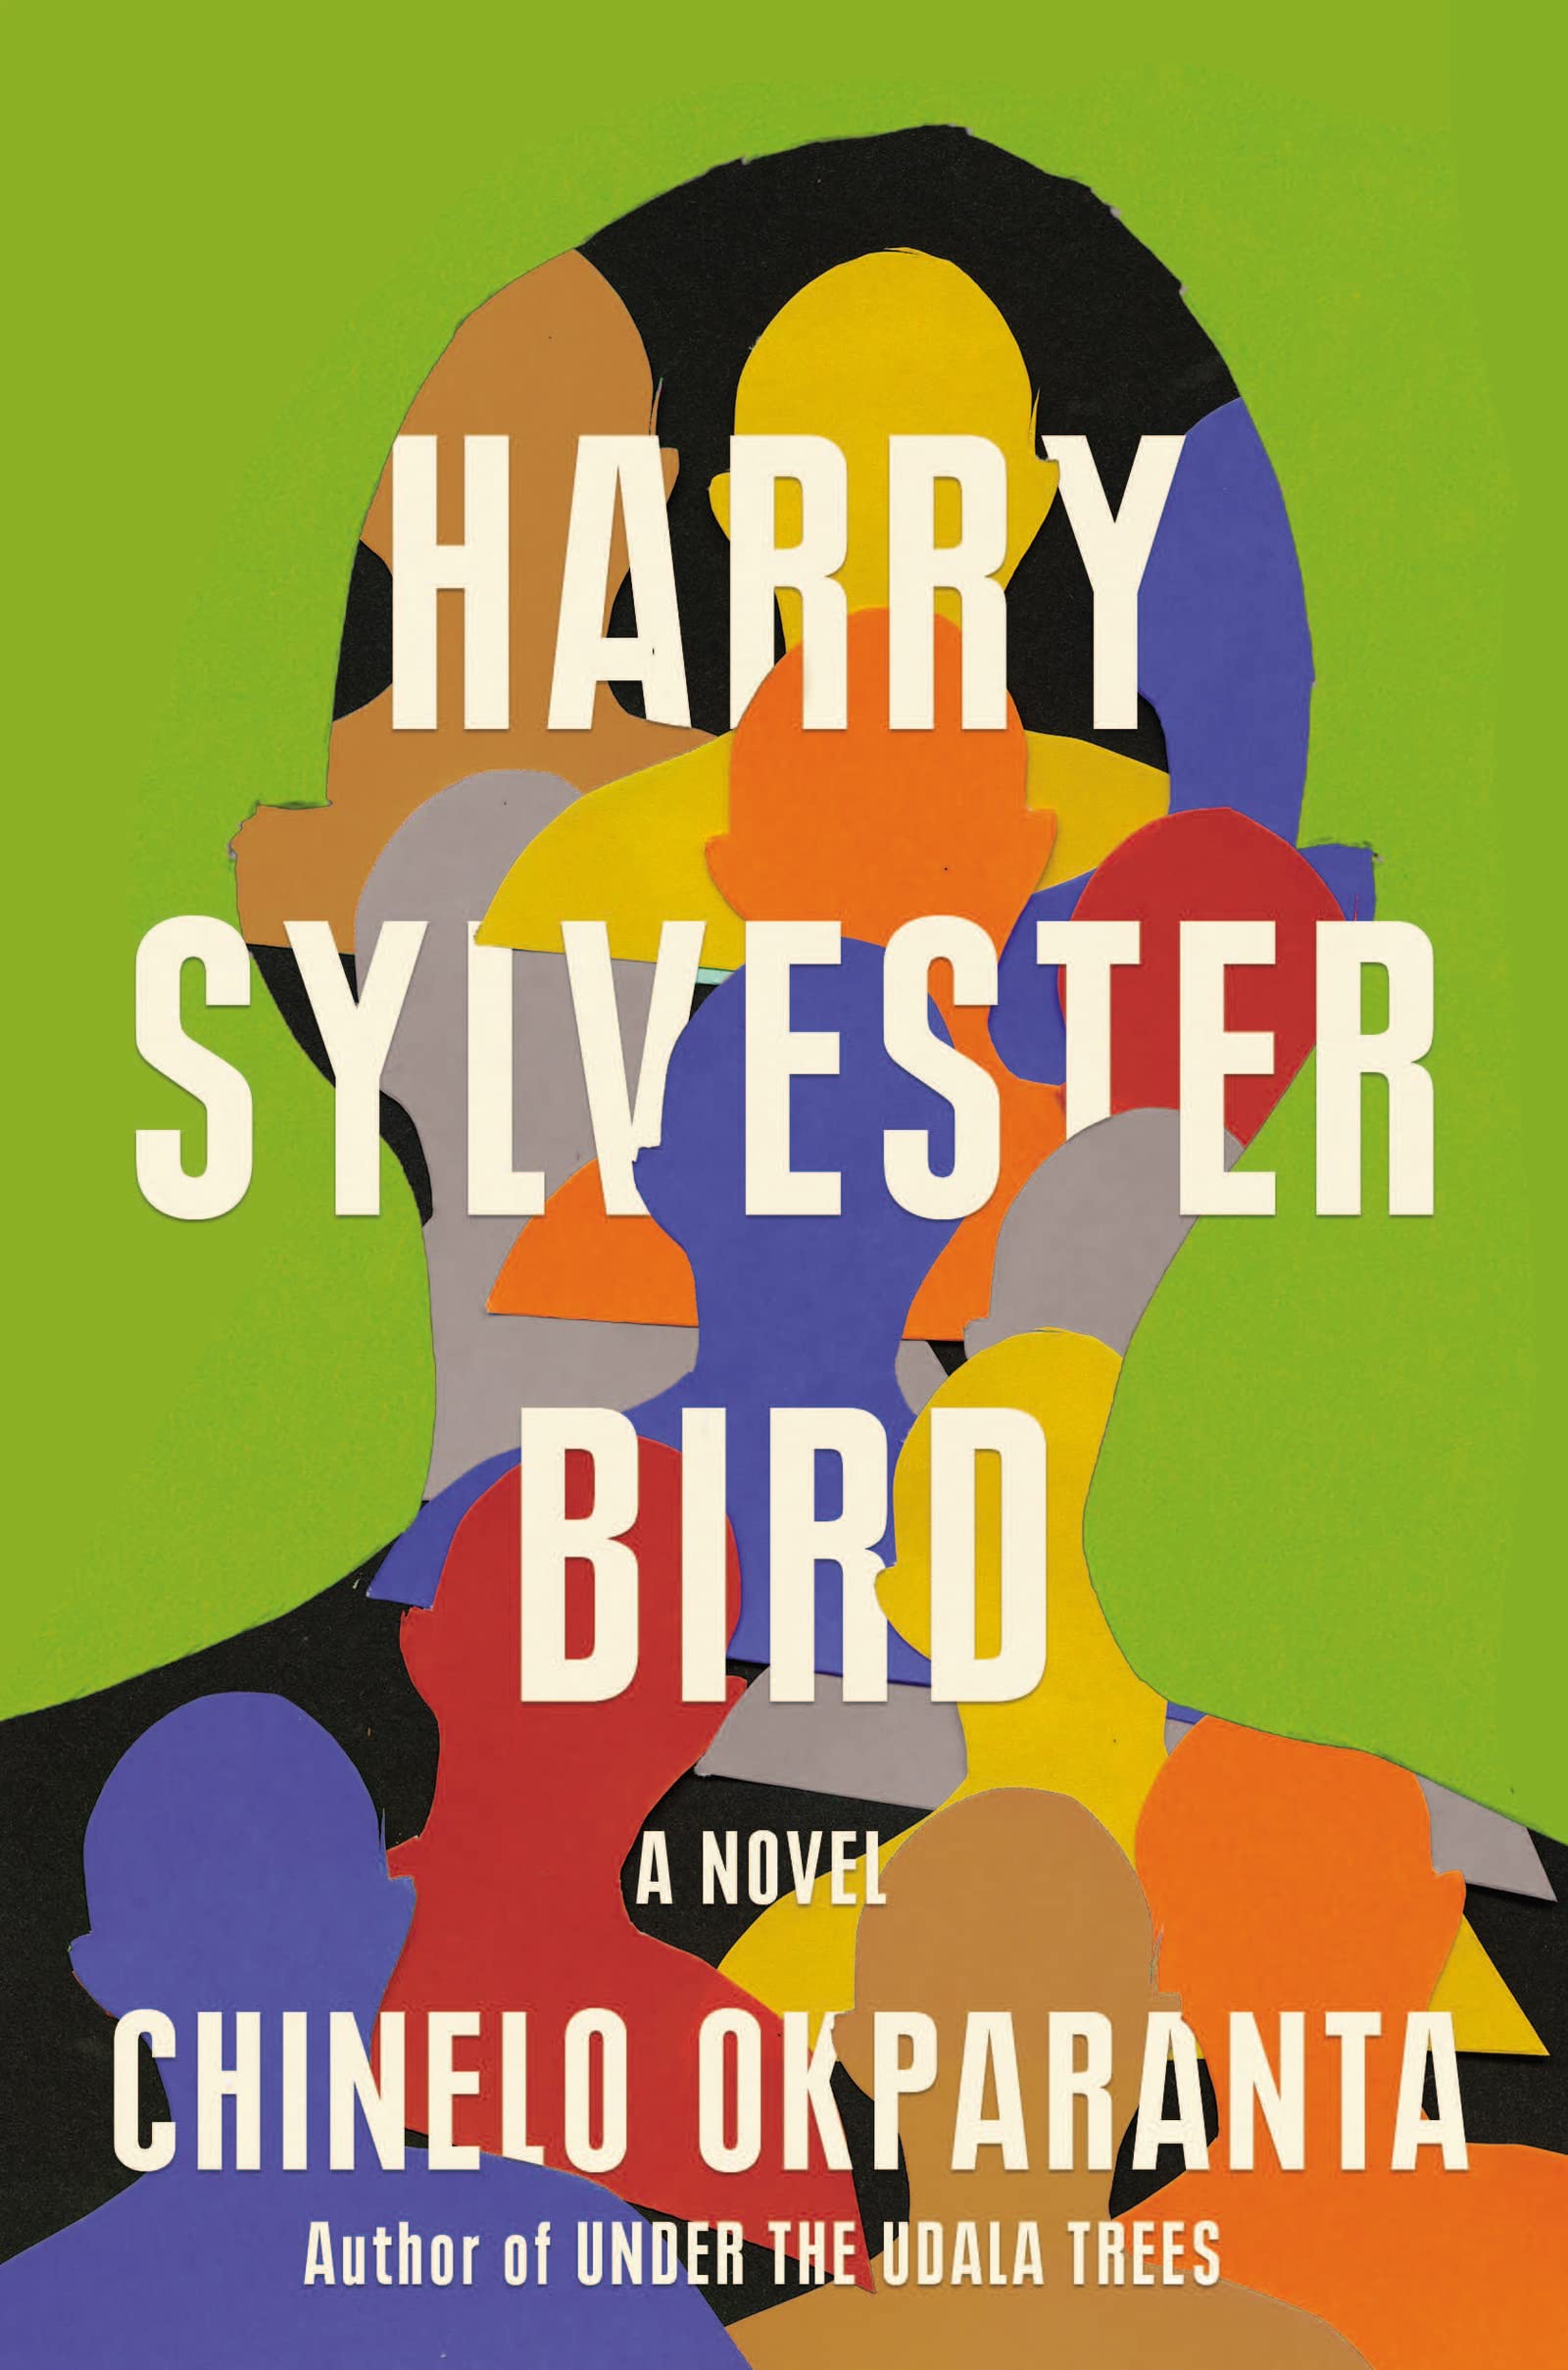 Racism Through the Eyes Love and Desire | Review of Harry Sylvester Bird by Chinelo Okparanta